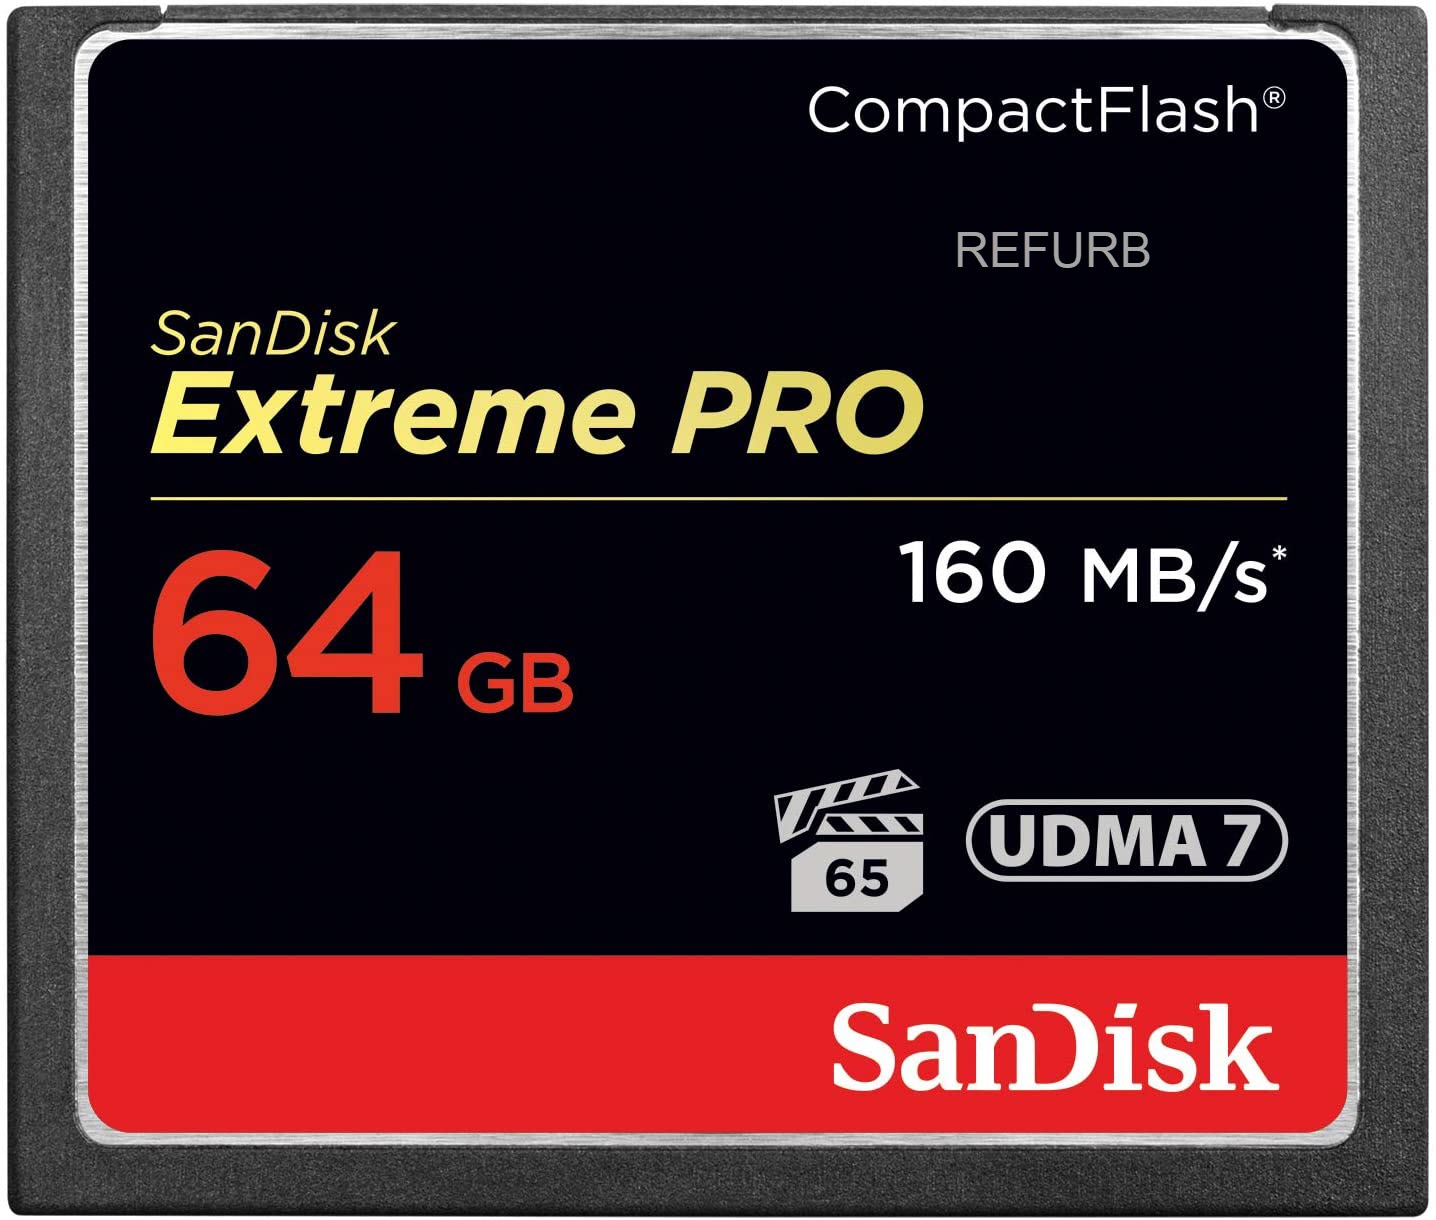 SanDisk Extreme PRO 64GB CF Compact Flash Card UDMA 7 Speed Up To 160MB/s SDCFXPS-064G-X46 (Certified Refurbished)